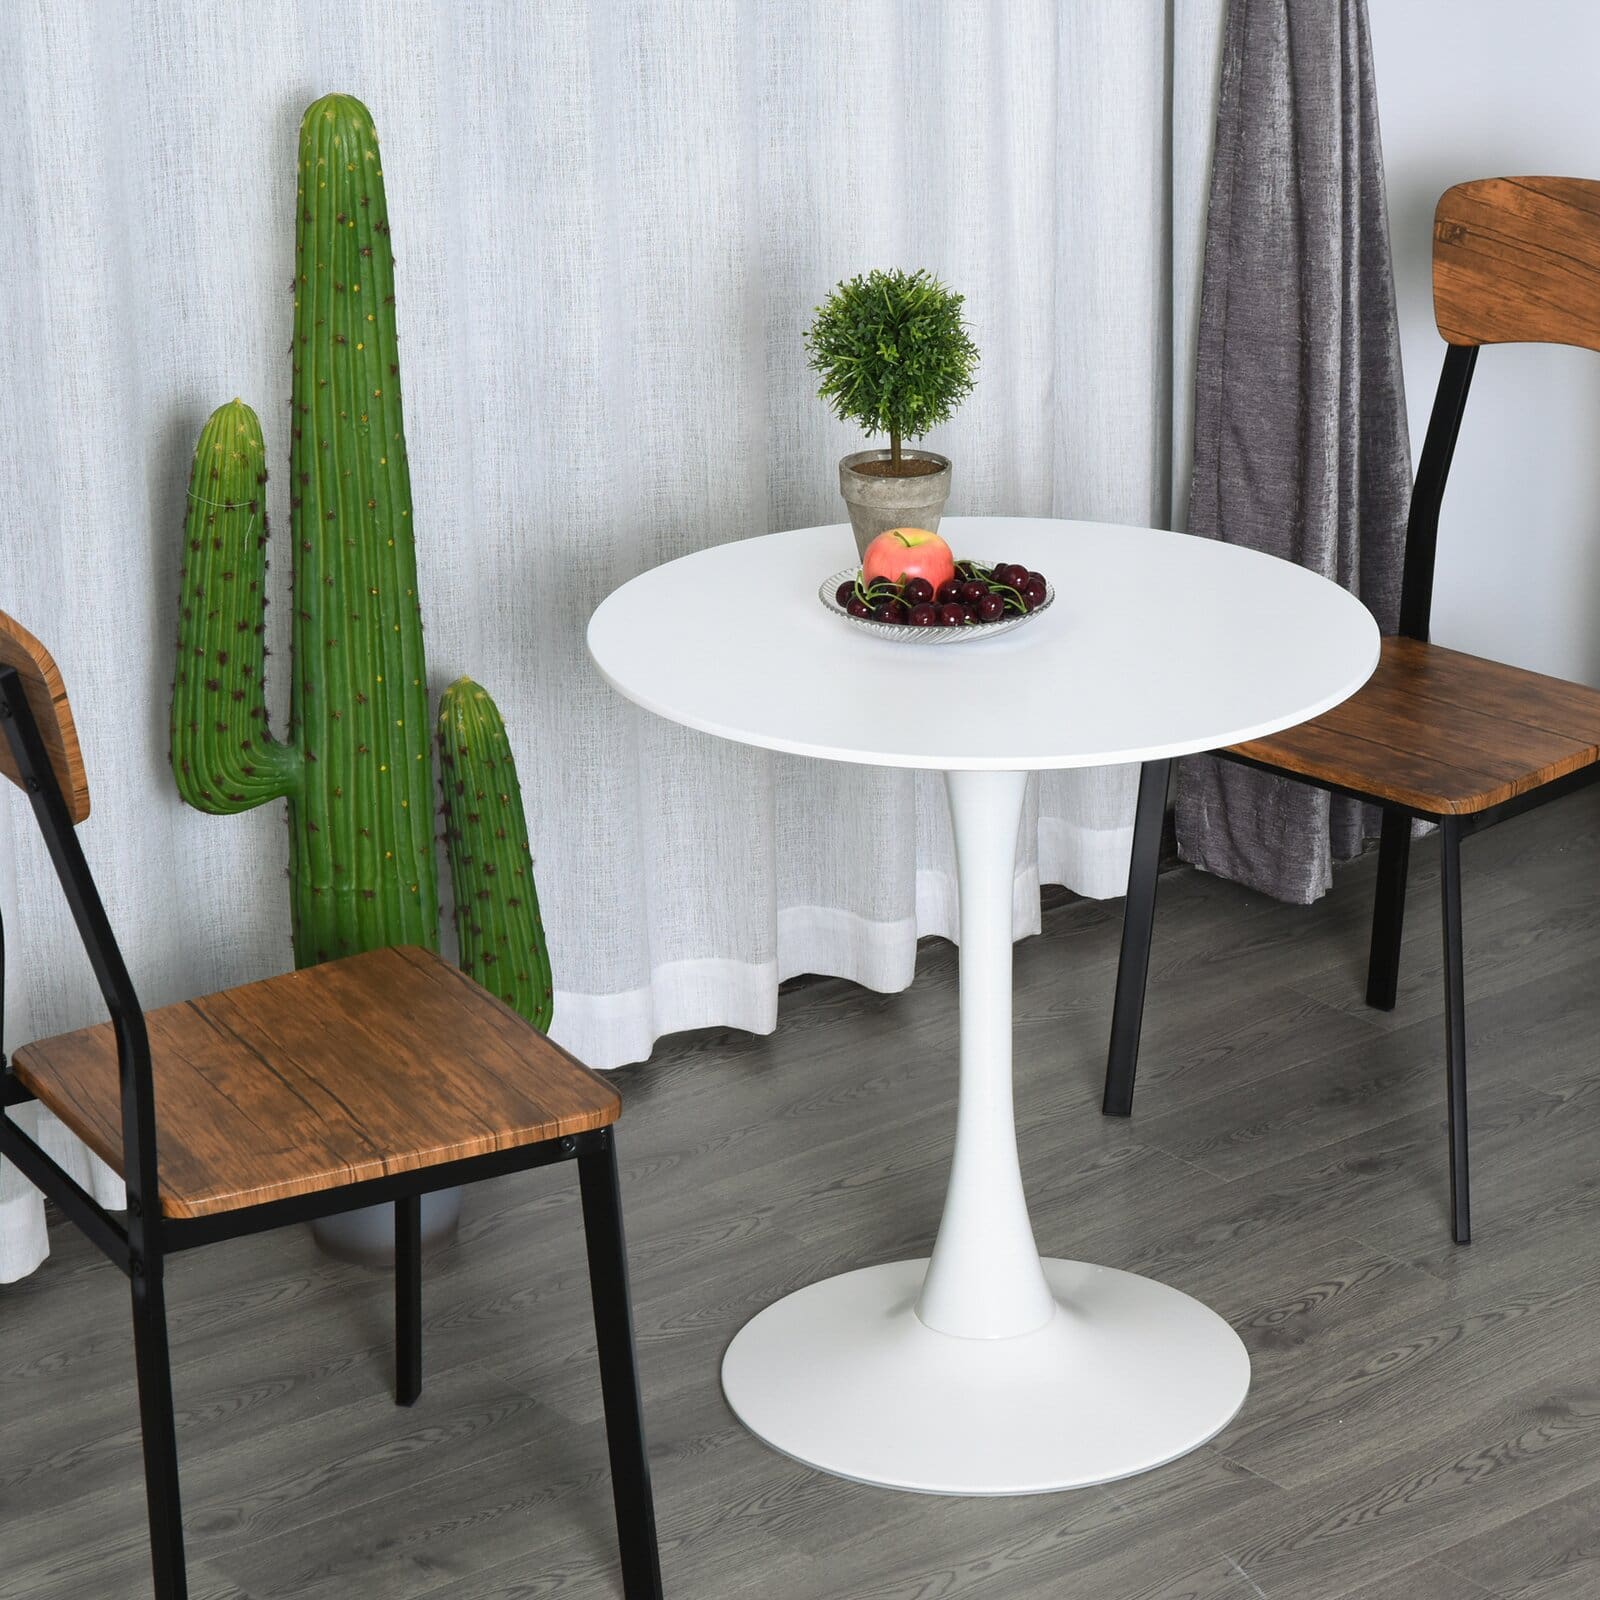 Get The Designer Look With This Sleek Cocktail Table